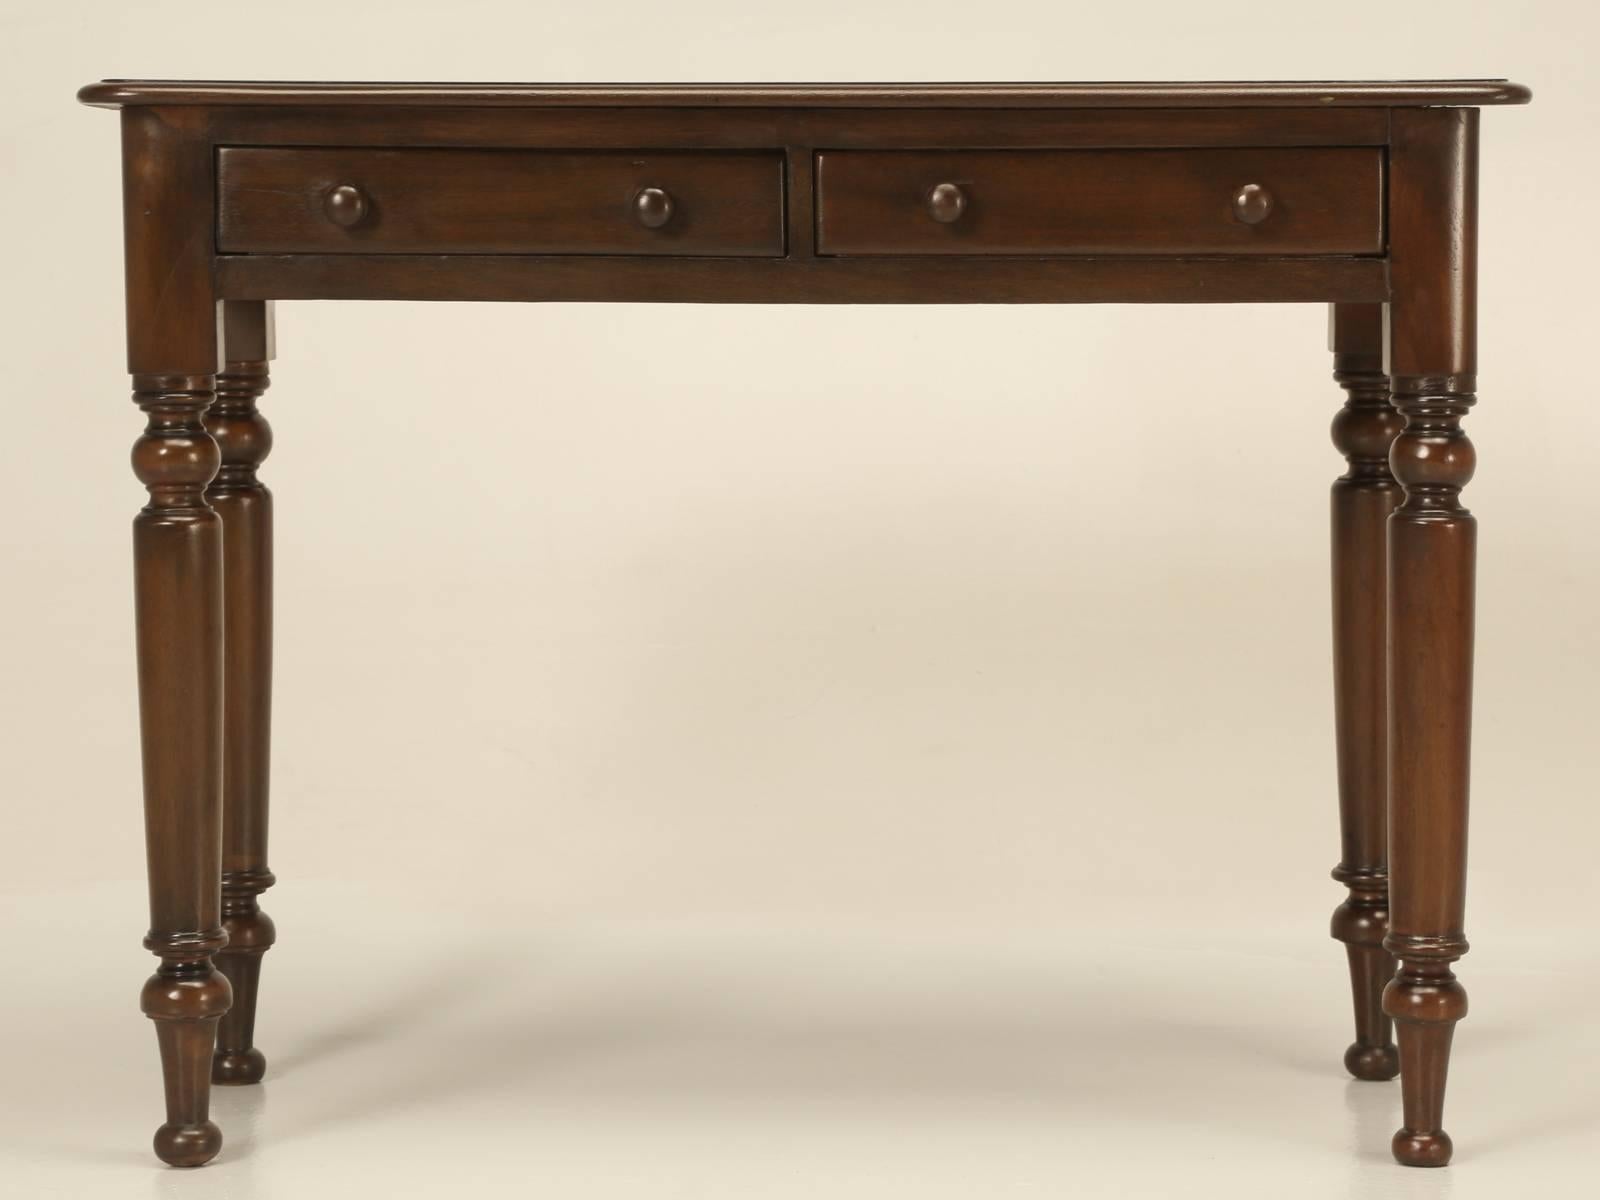 Antique French Console Table or Ladies Small Writing Desk, Restored circa 1800s In Good Condition For Sale In Chicago, IL